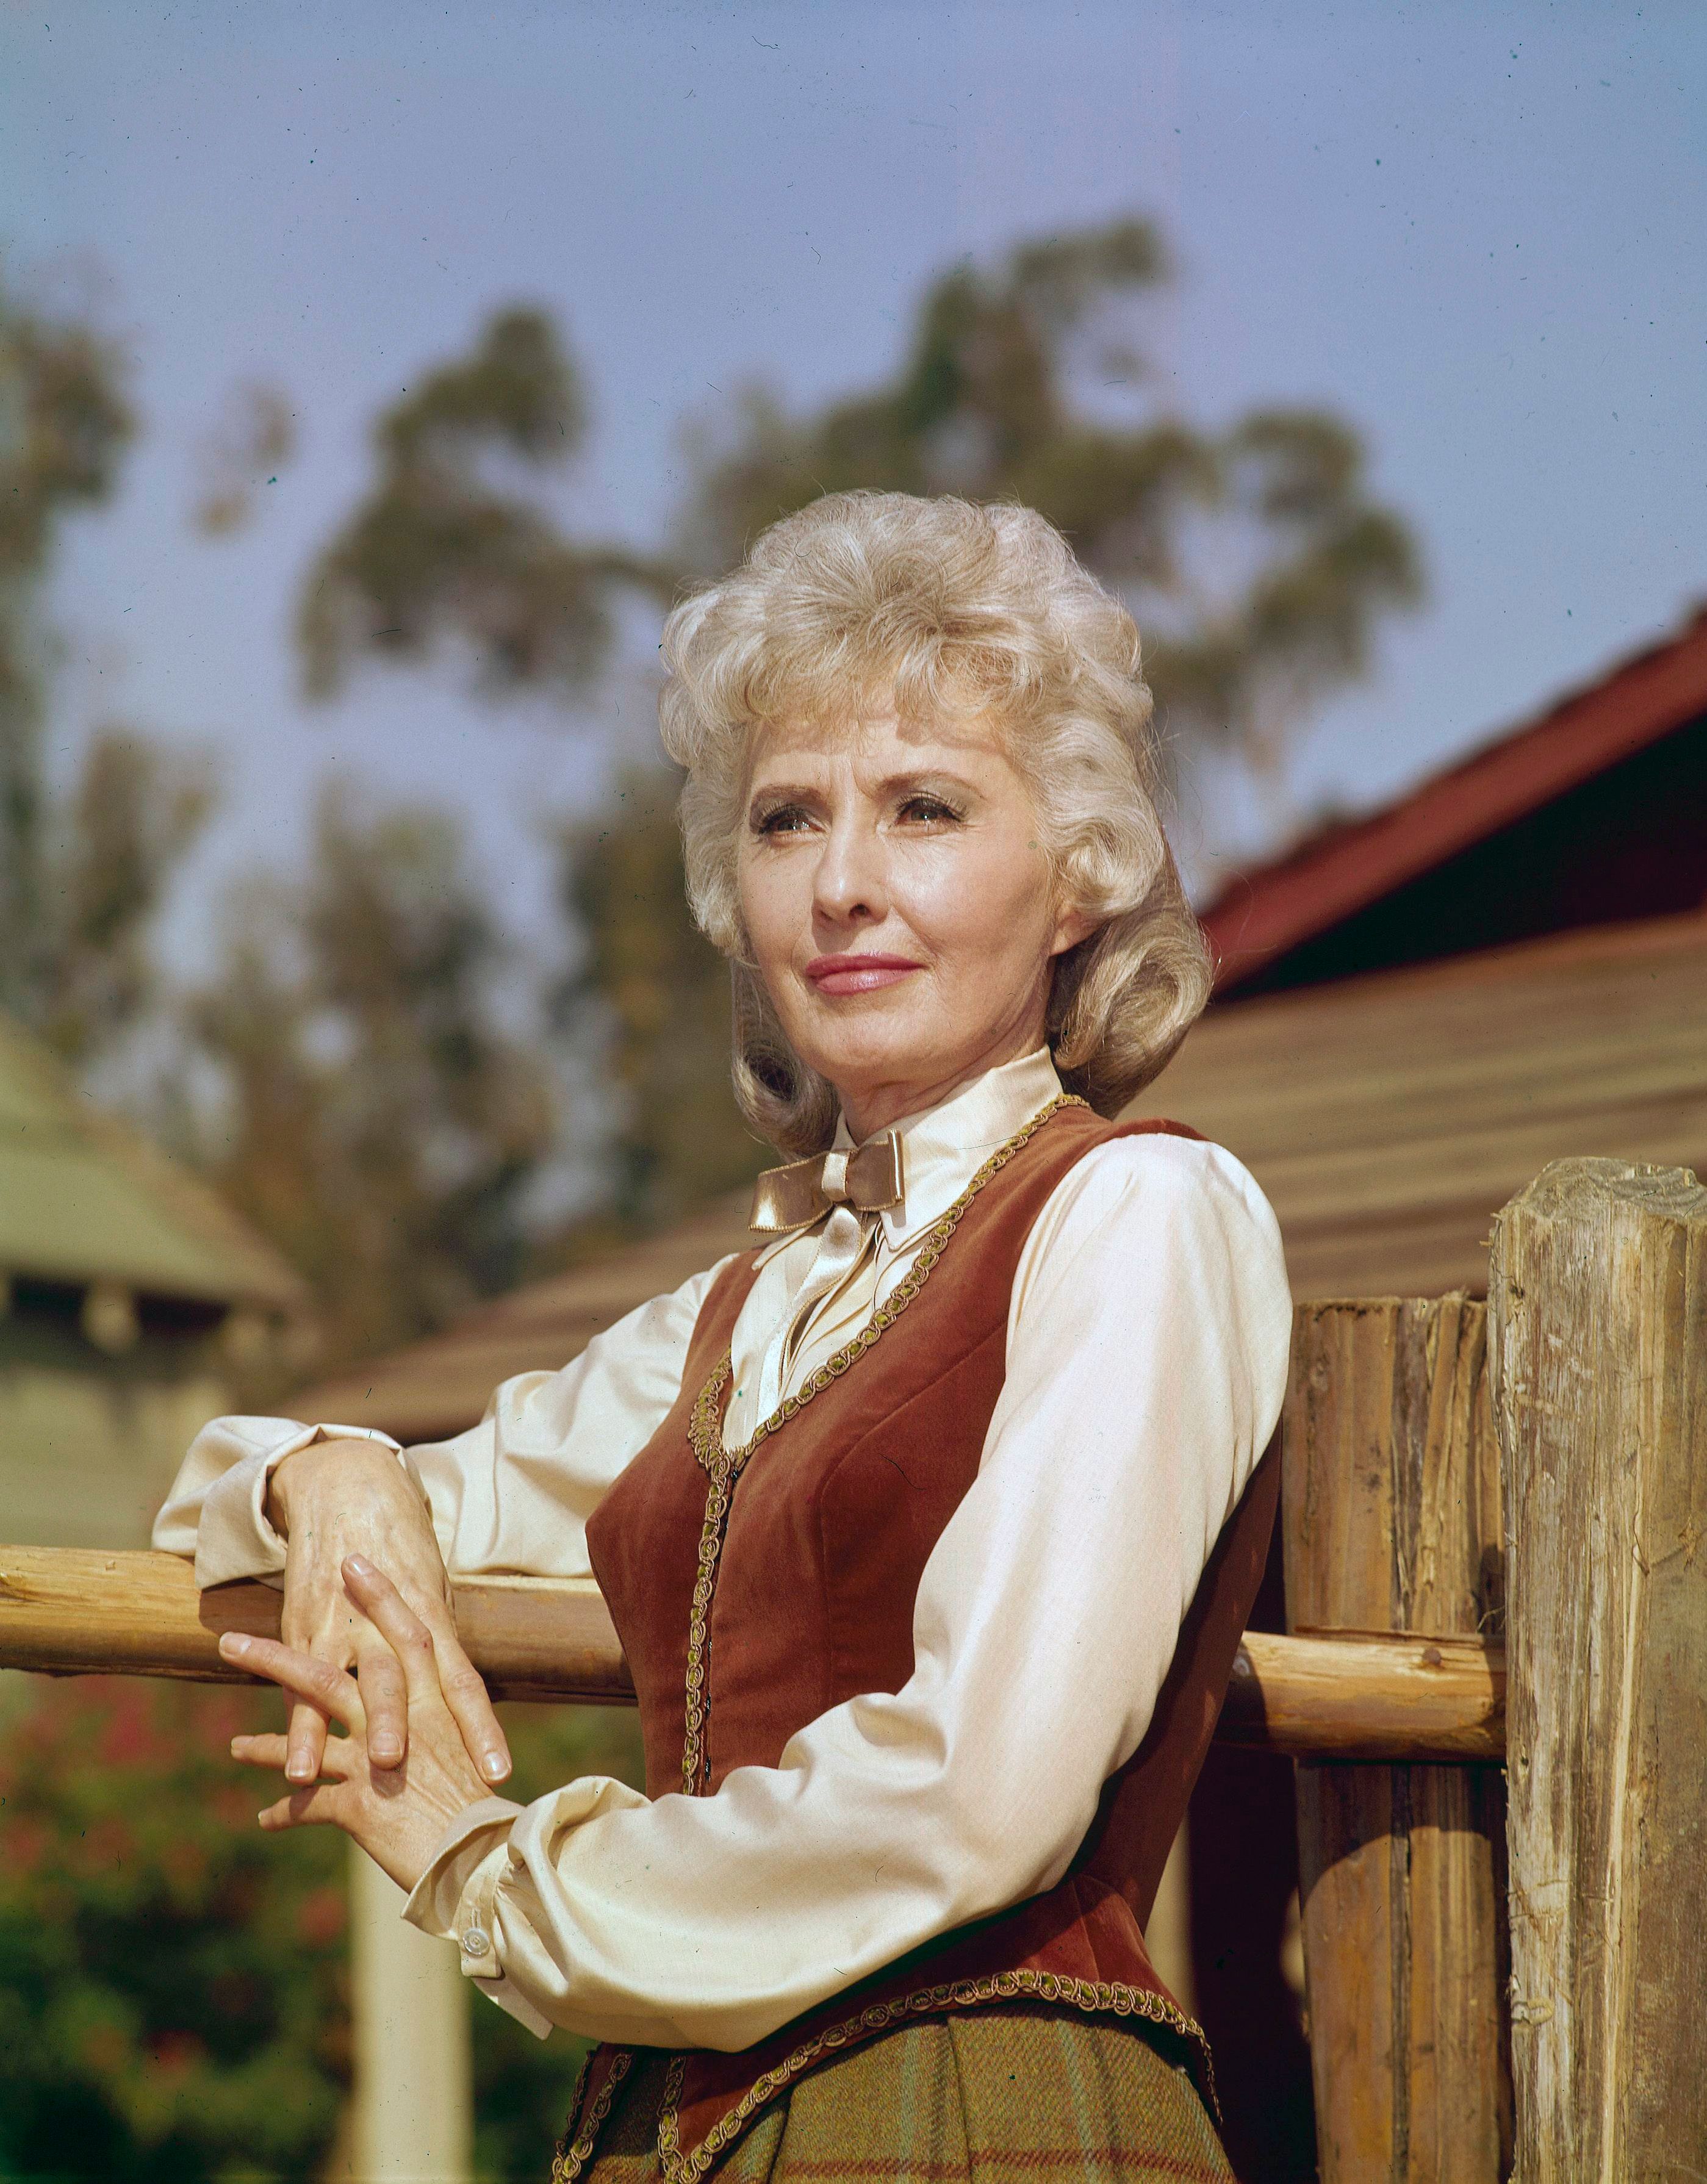 Barbara Stanwyck in "The Big Valley" 1967. | Photo: Getty Images